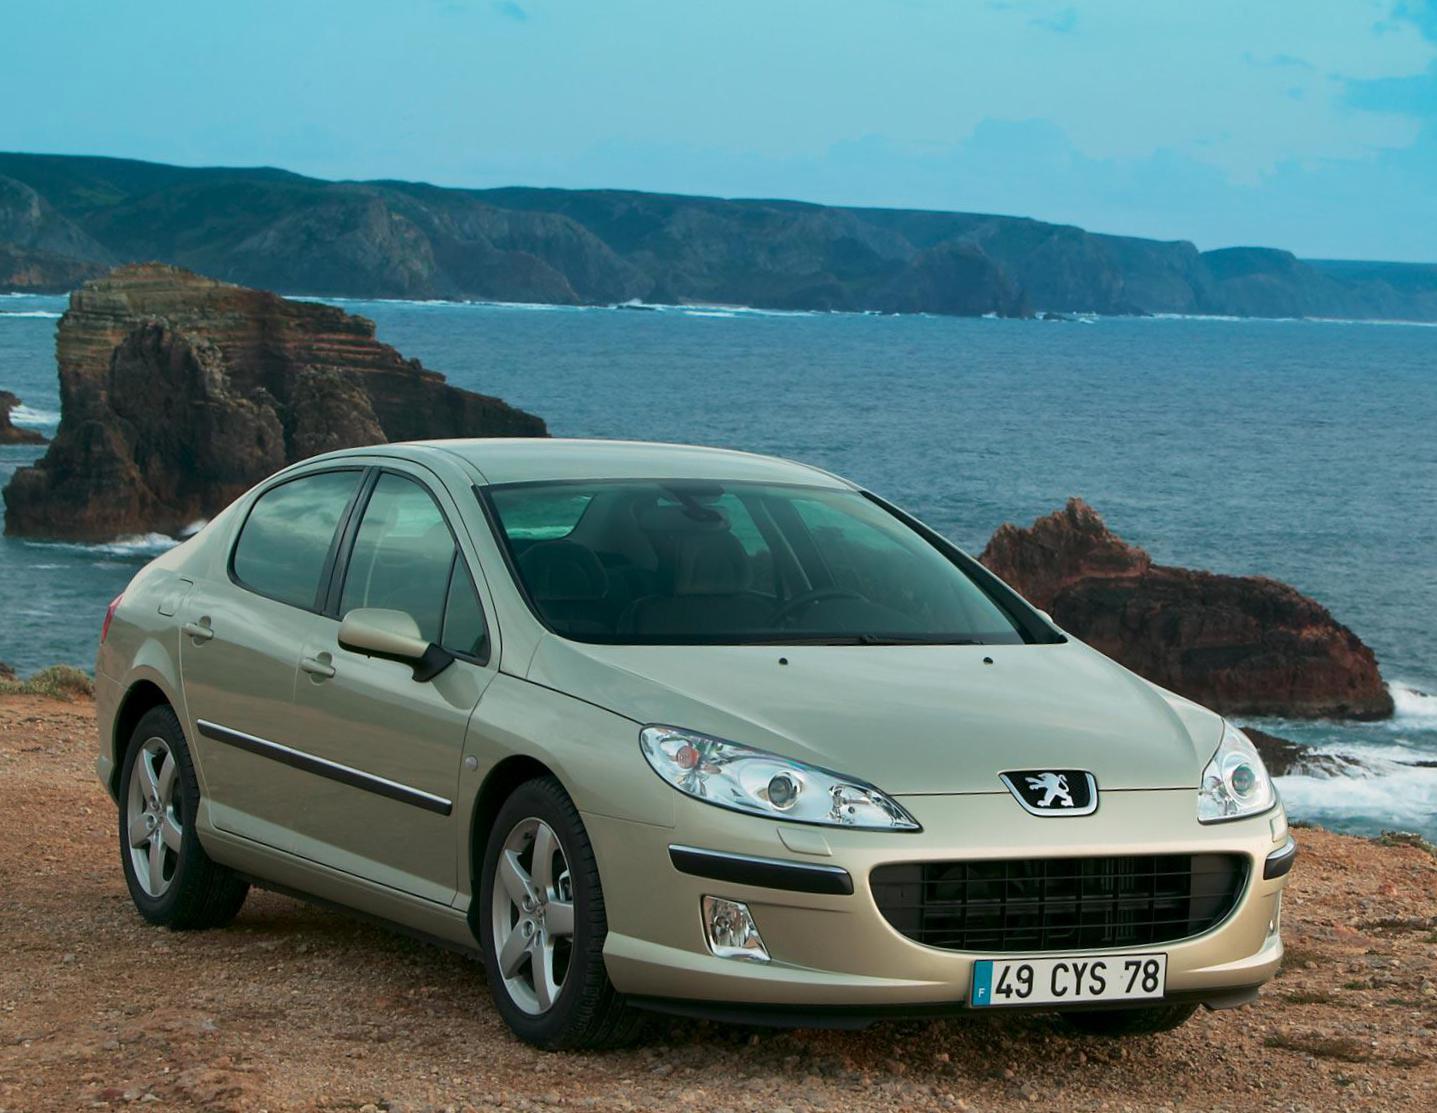 Peugeot 407 Photos and Specs. Photo Peugeot 407 sale and 24 perfect